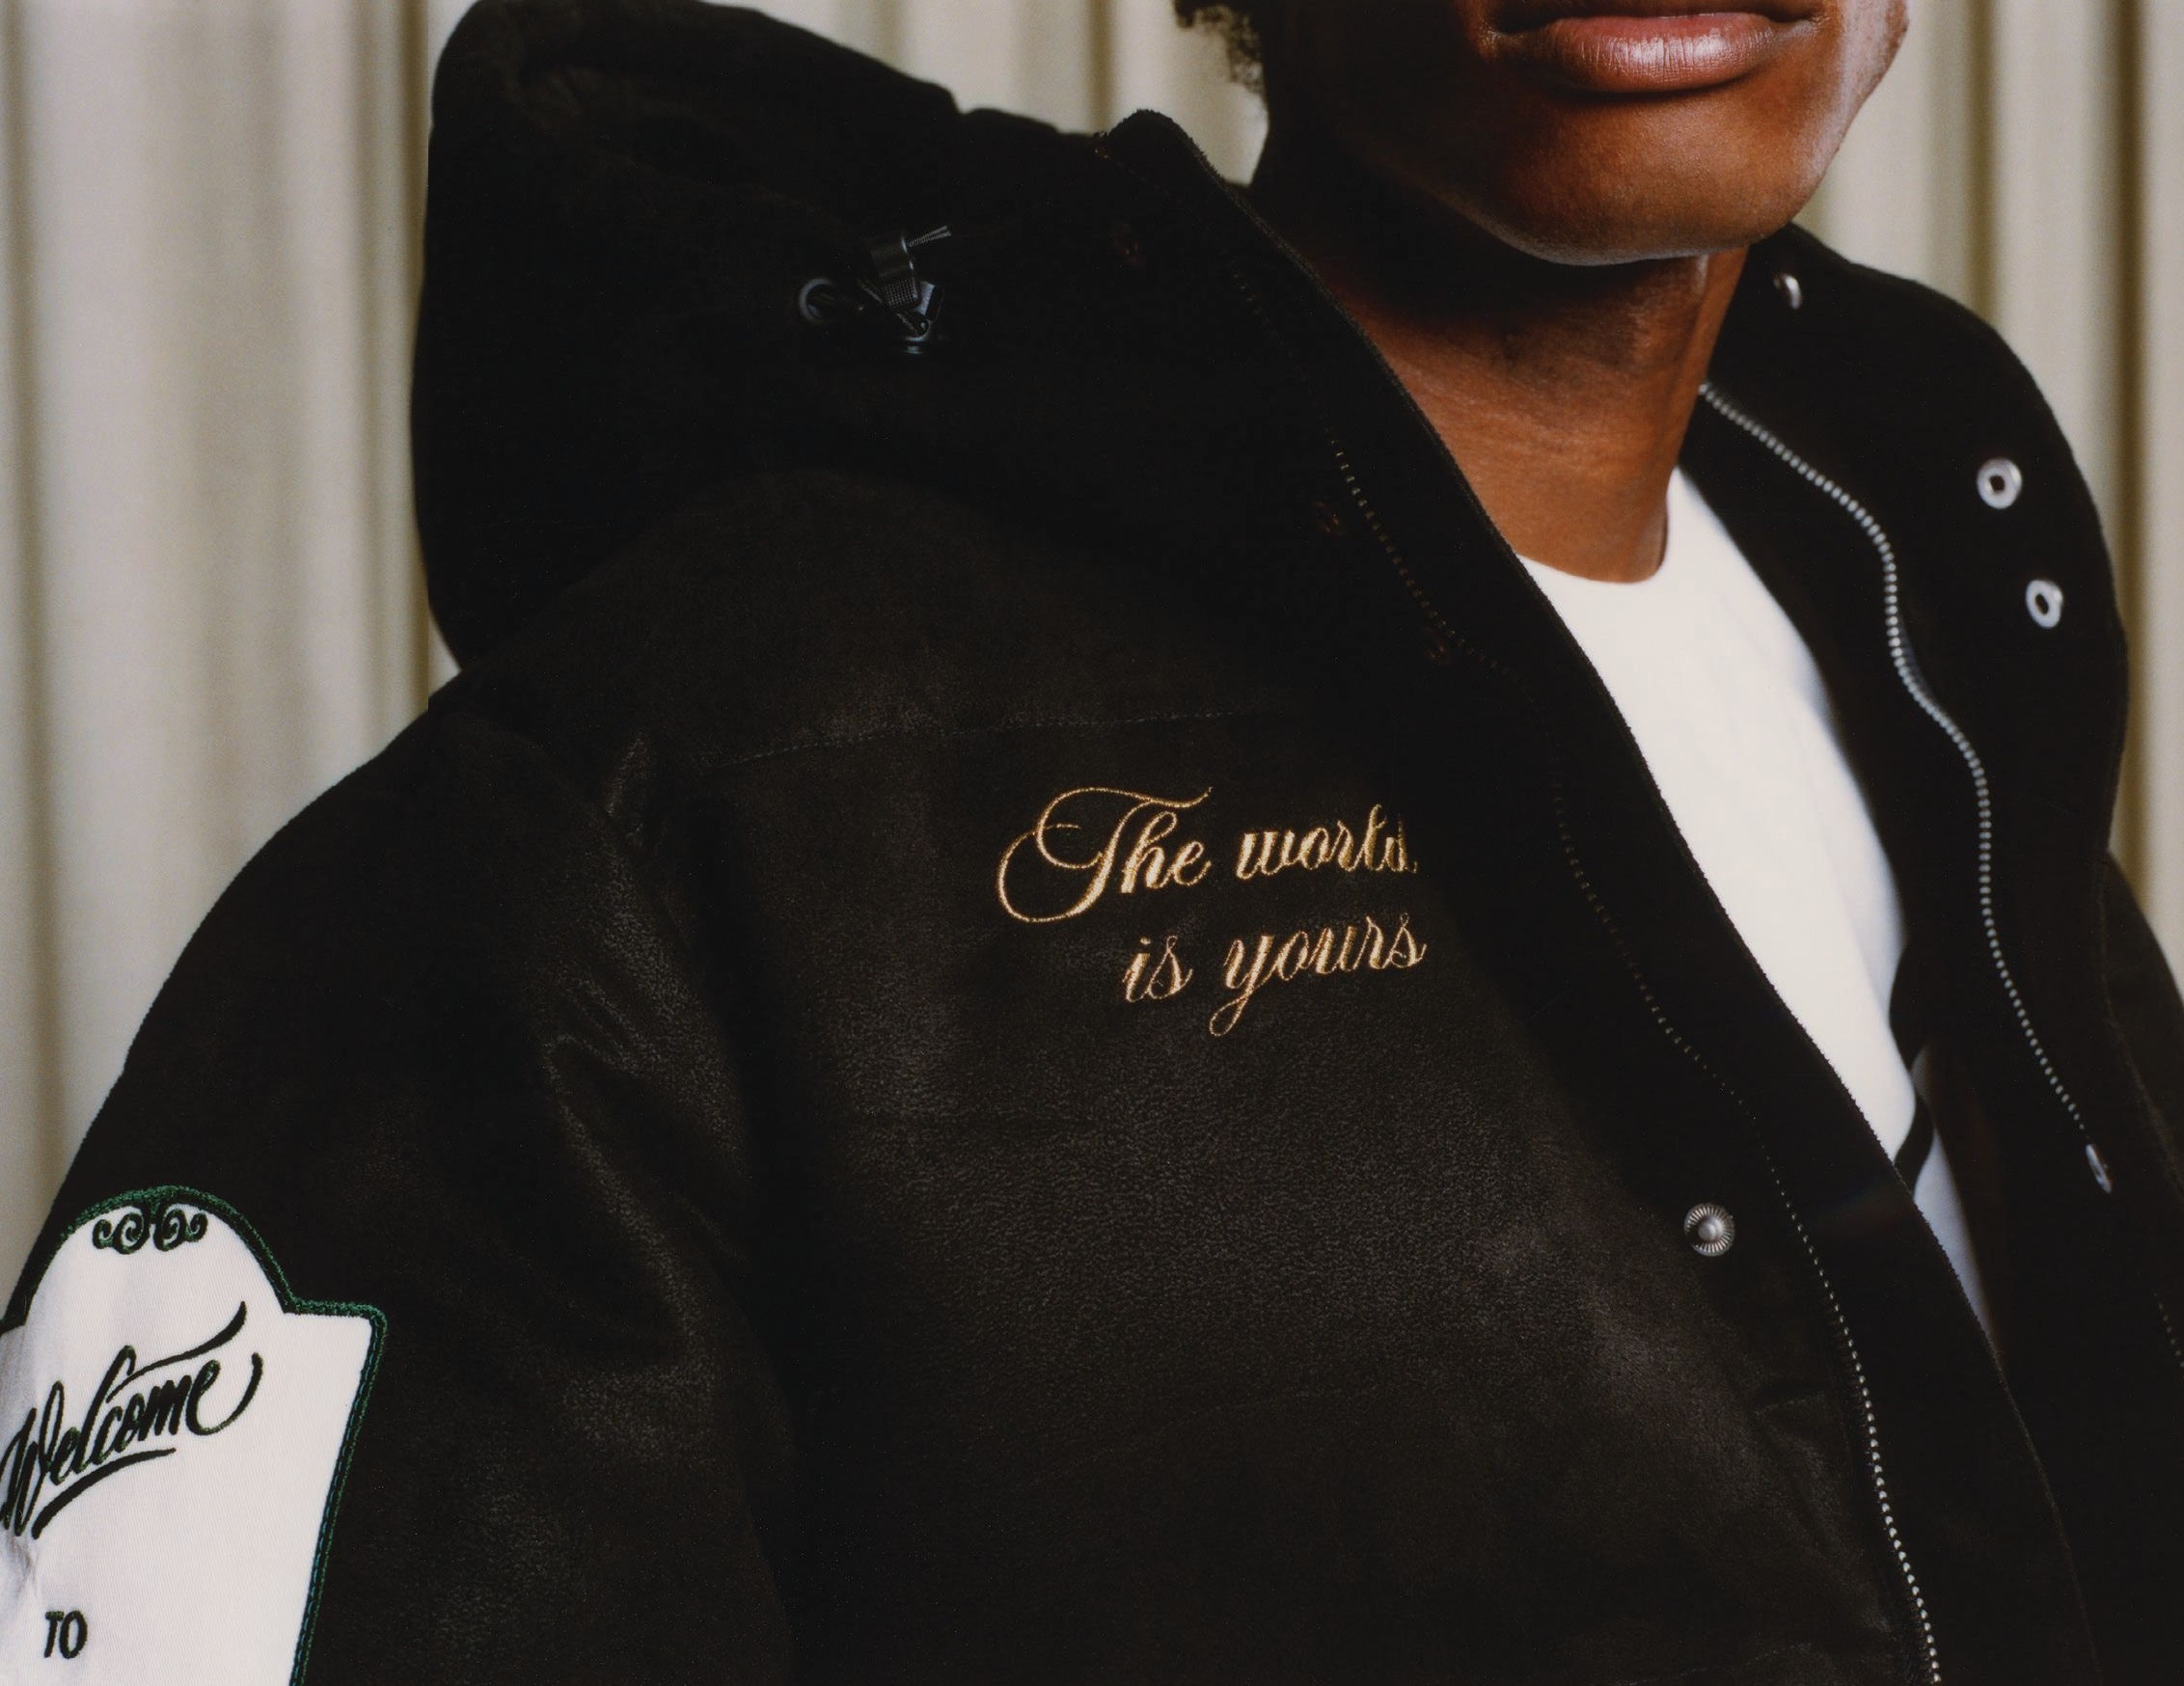 “The world is yours” letter detailing on the PUMA x Rhuigi down jacket PHOTO COURTESY OF PUMA